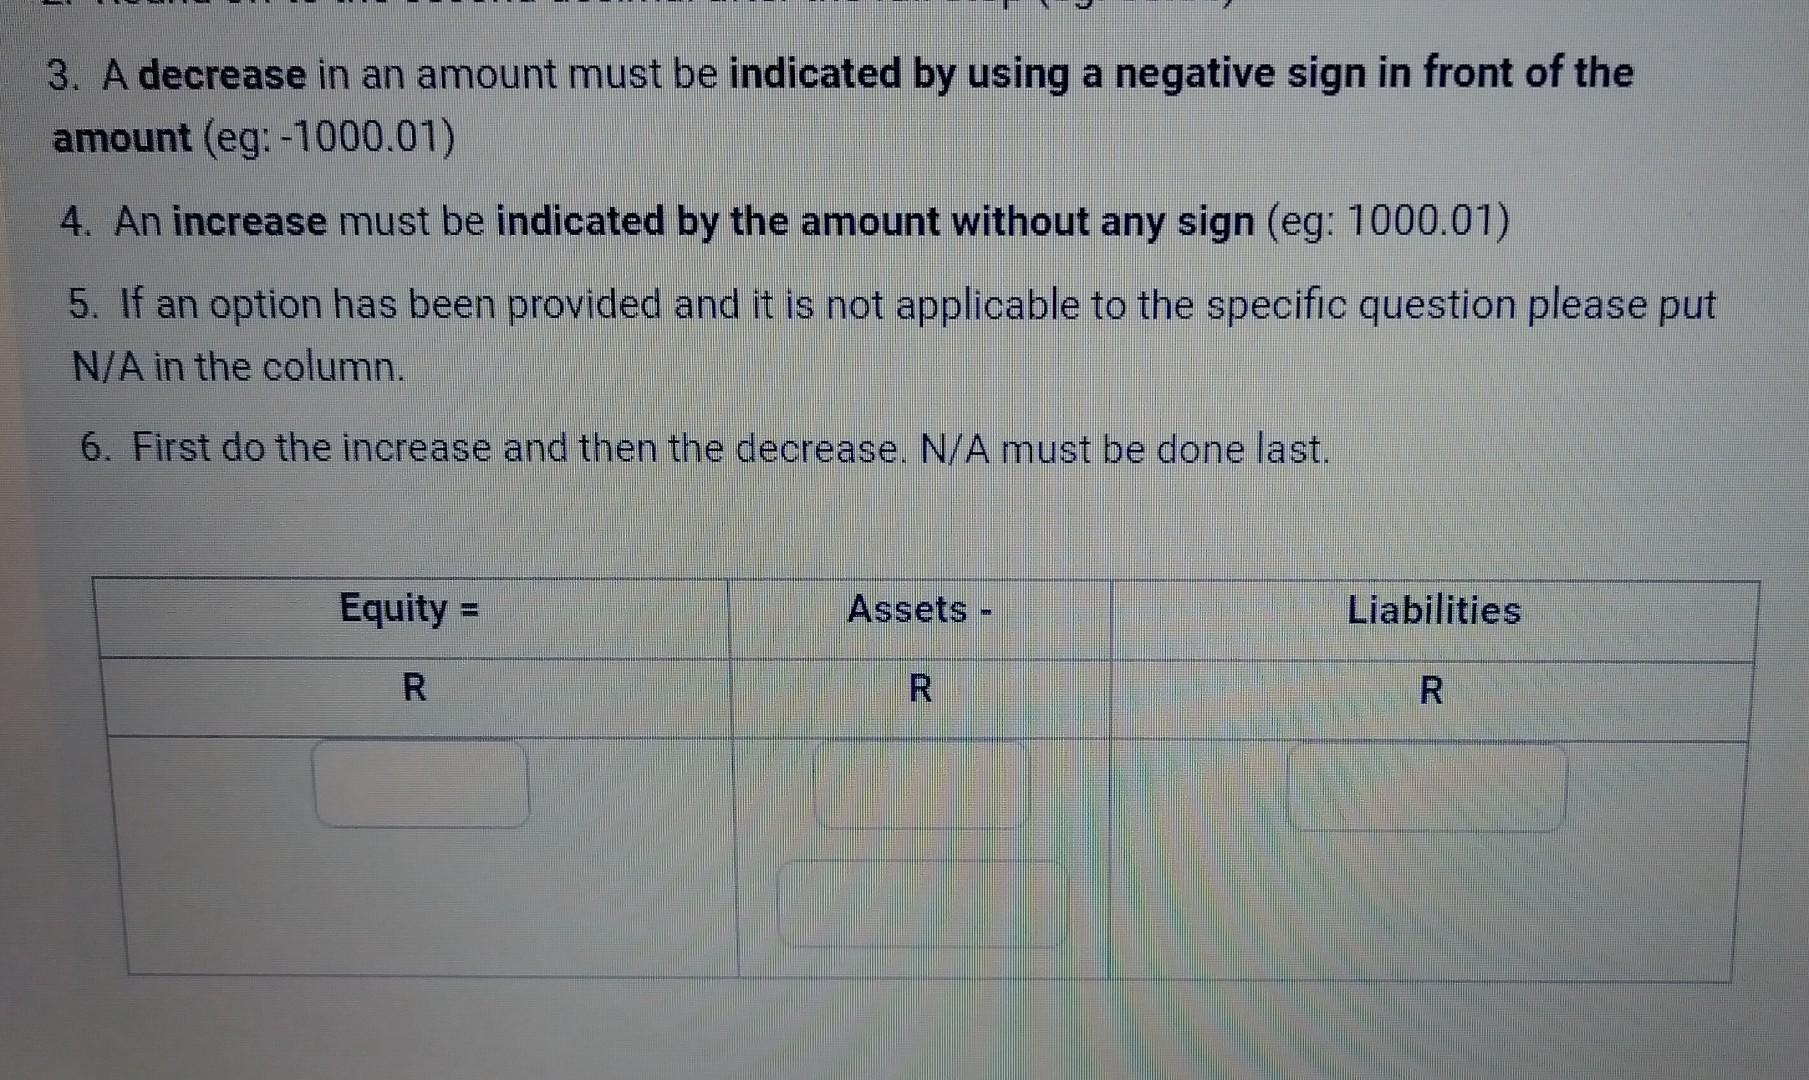 3. A decrease in an amount must be indicated by using a negative sign in front of the amount (eg: -1000.01)